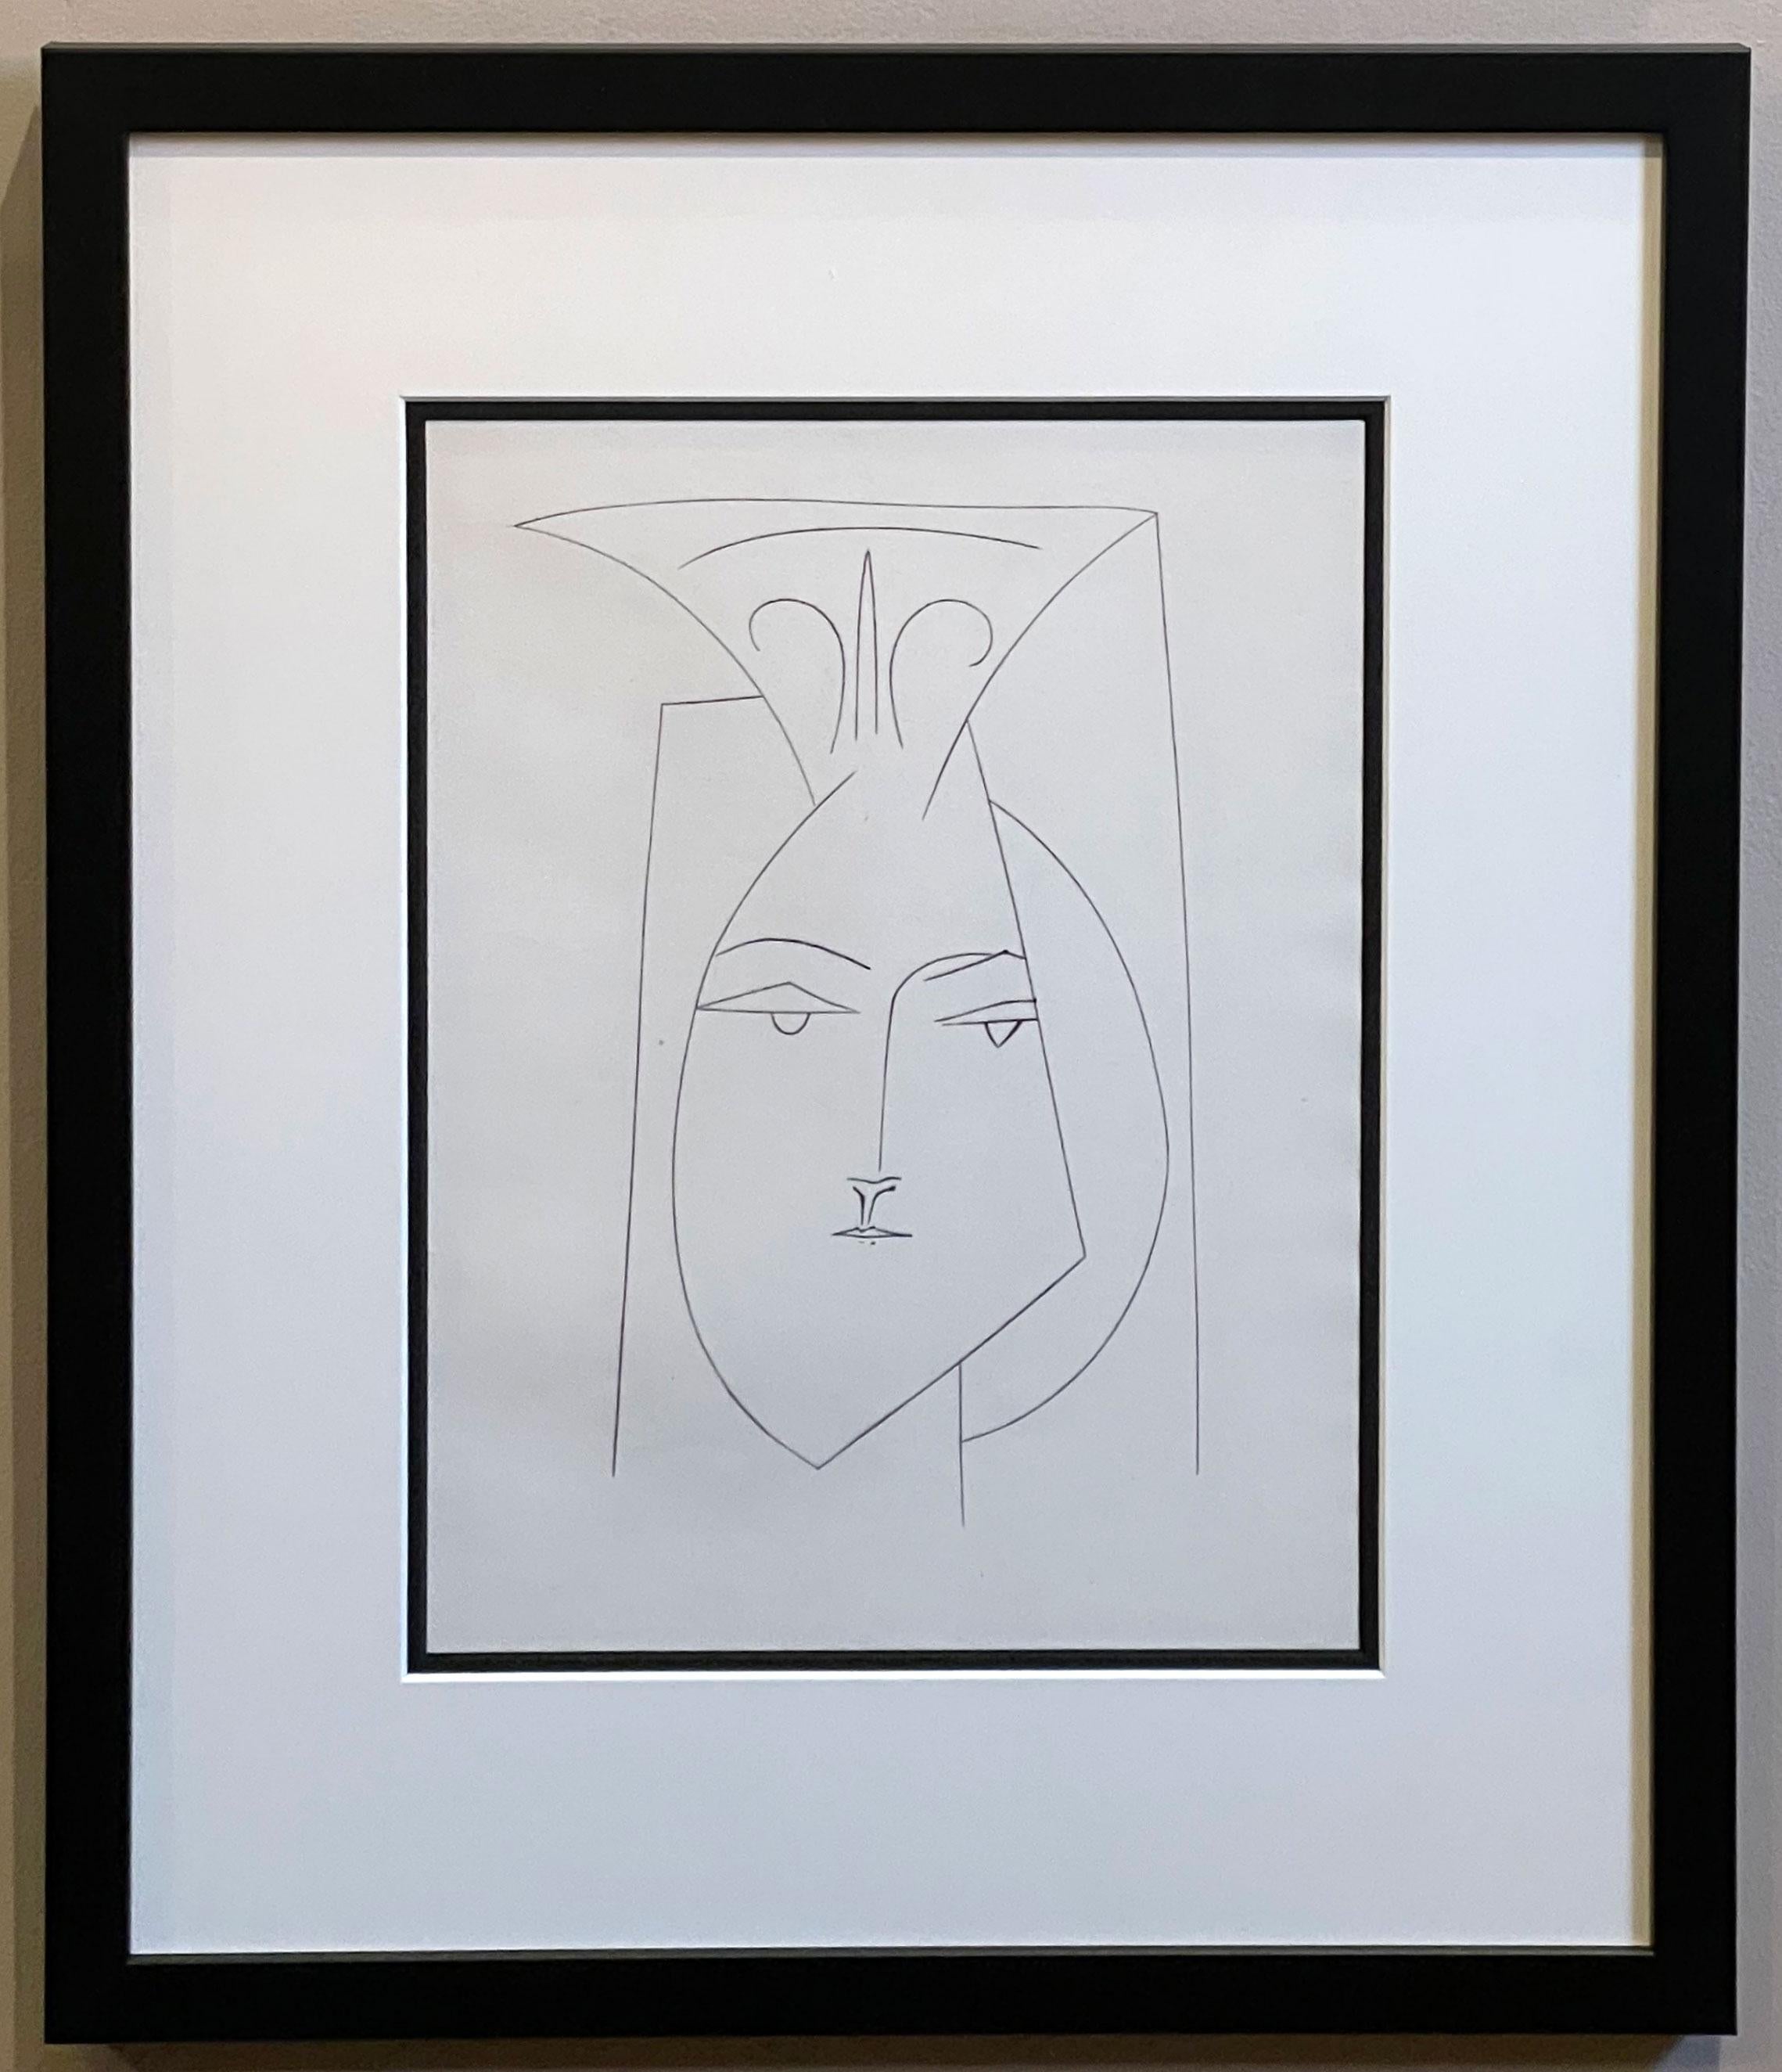 Pablo Picasso Portrait Print - Head of a Woman with Mantilla (Plate I), from Carmen